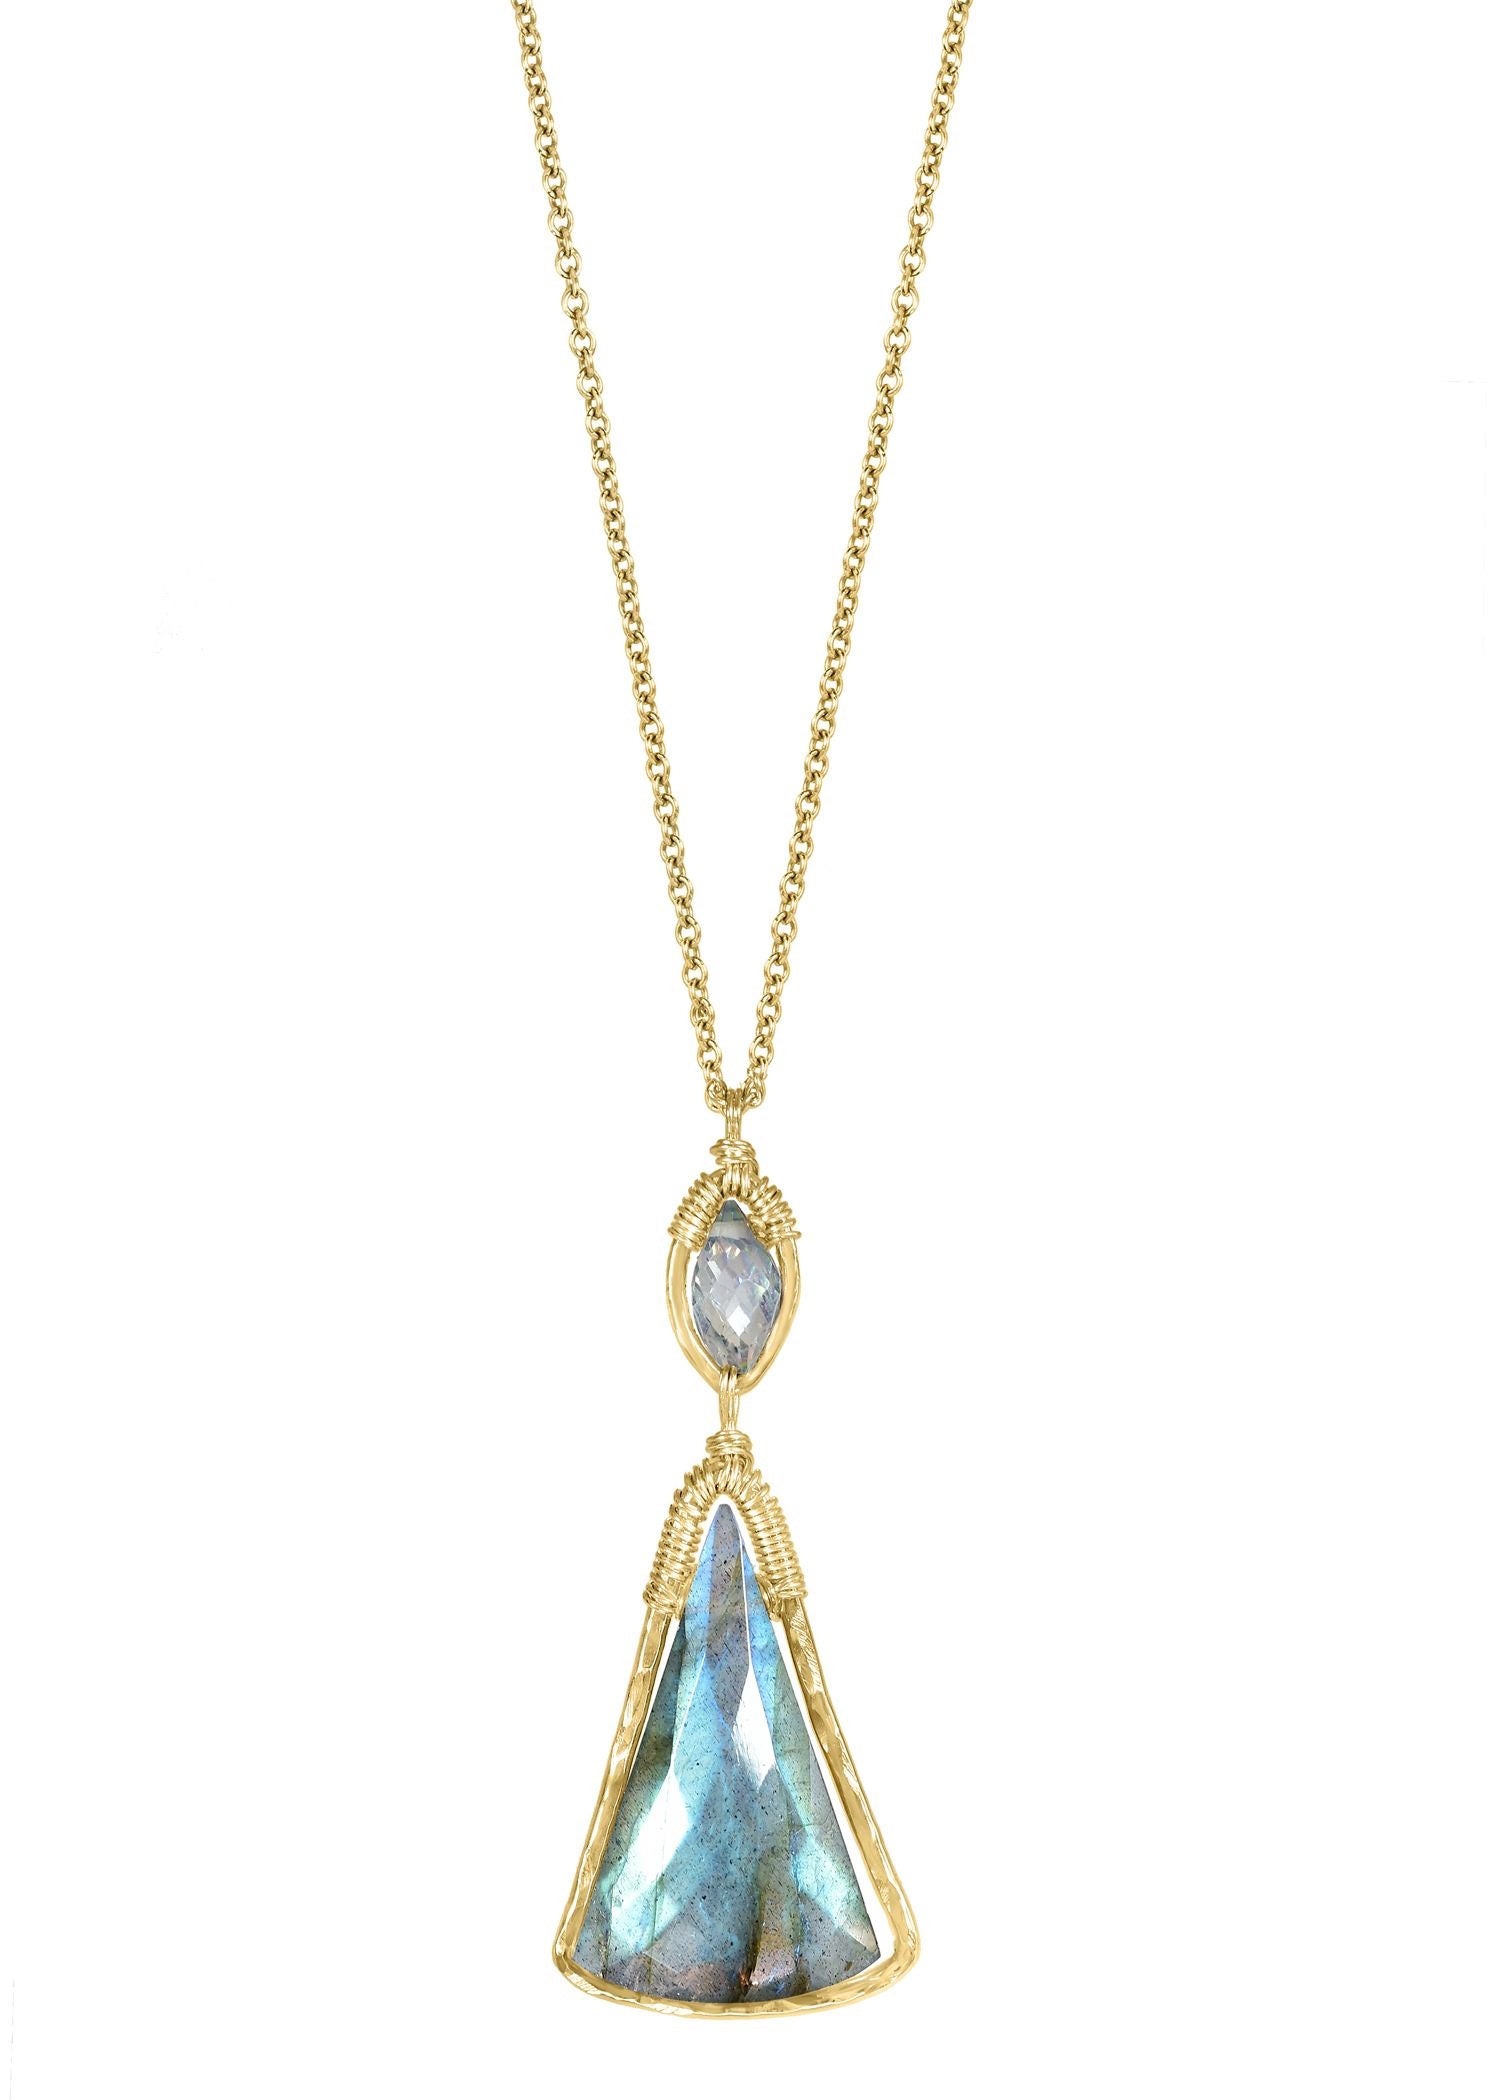 Labradorite Mystic topaz 14k gold fill Chain measures 17” in length Pendant measures 1-3/8” in length and 9/16” in width Handmade in our Los Angeles studio